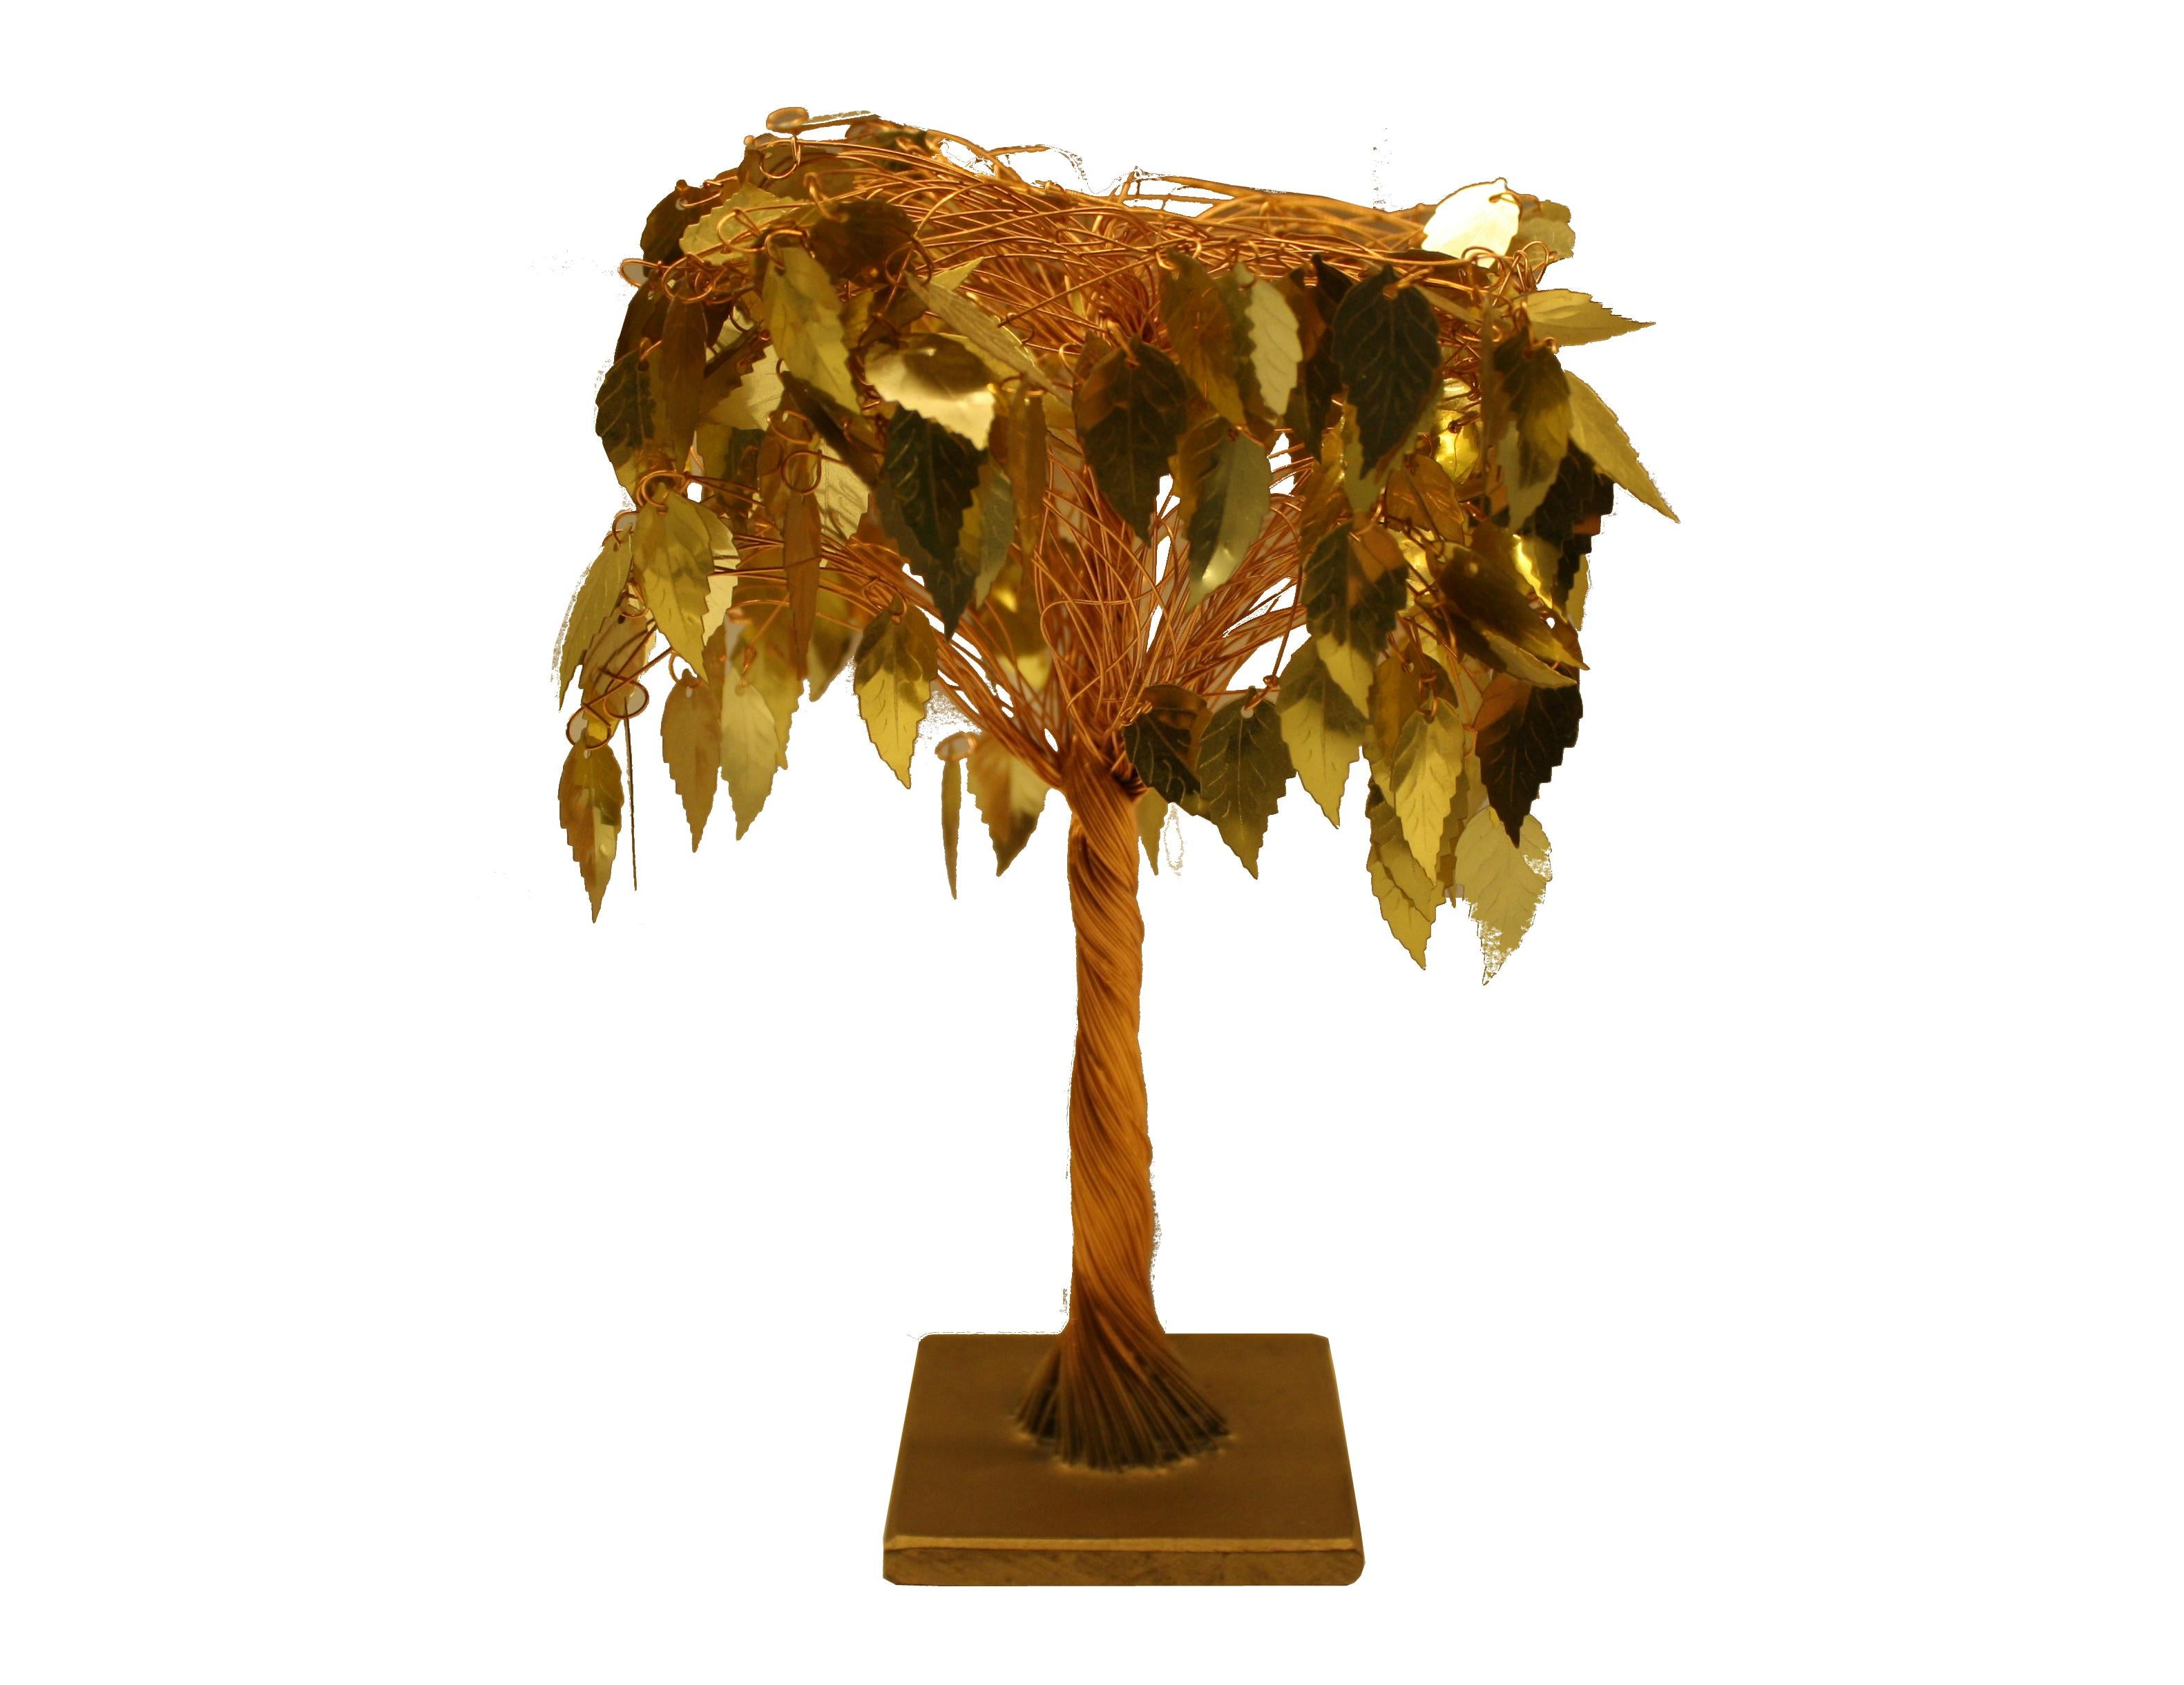 Small decorative tree made from woven copper and gold coloured leaves.

This comes from a gift shop in antwerp, belgium.

Lovely small decorative item.

Measures: Height 22cm/8.66